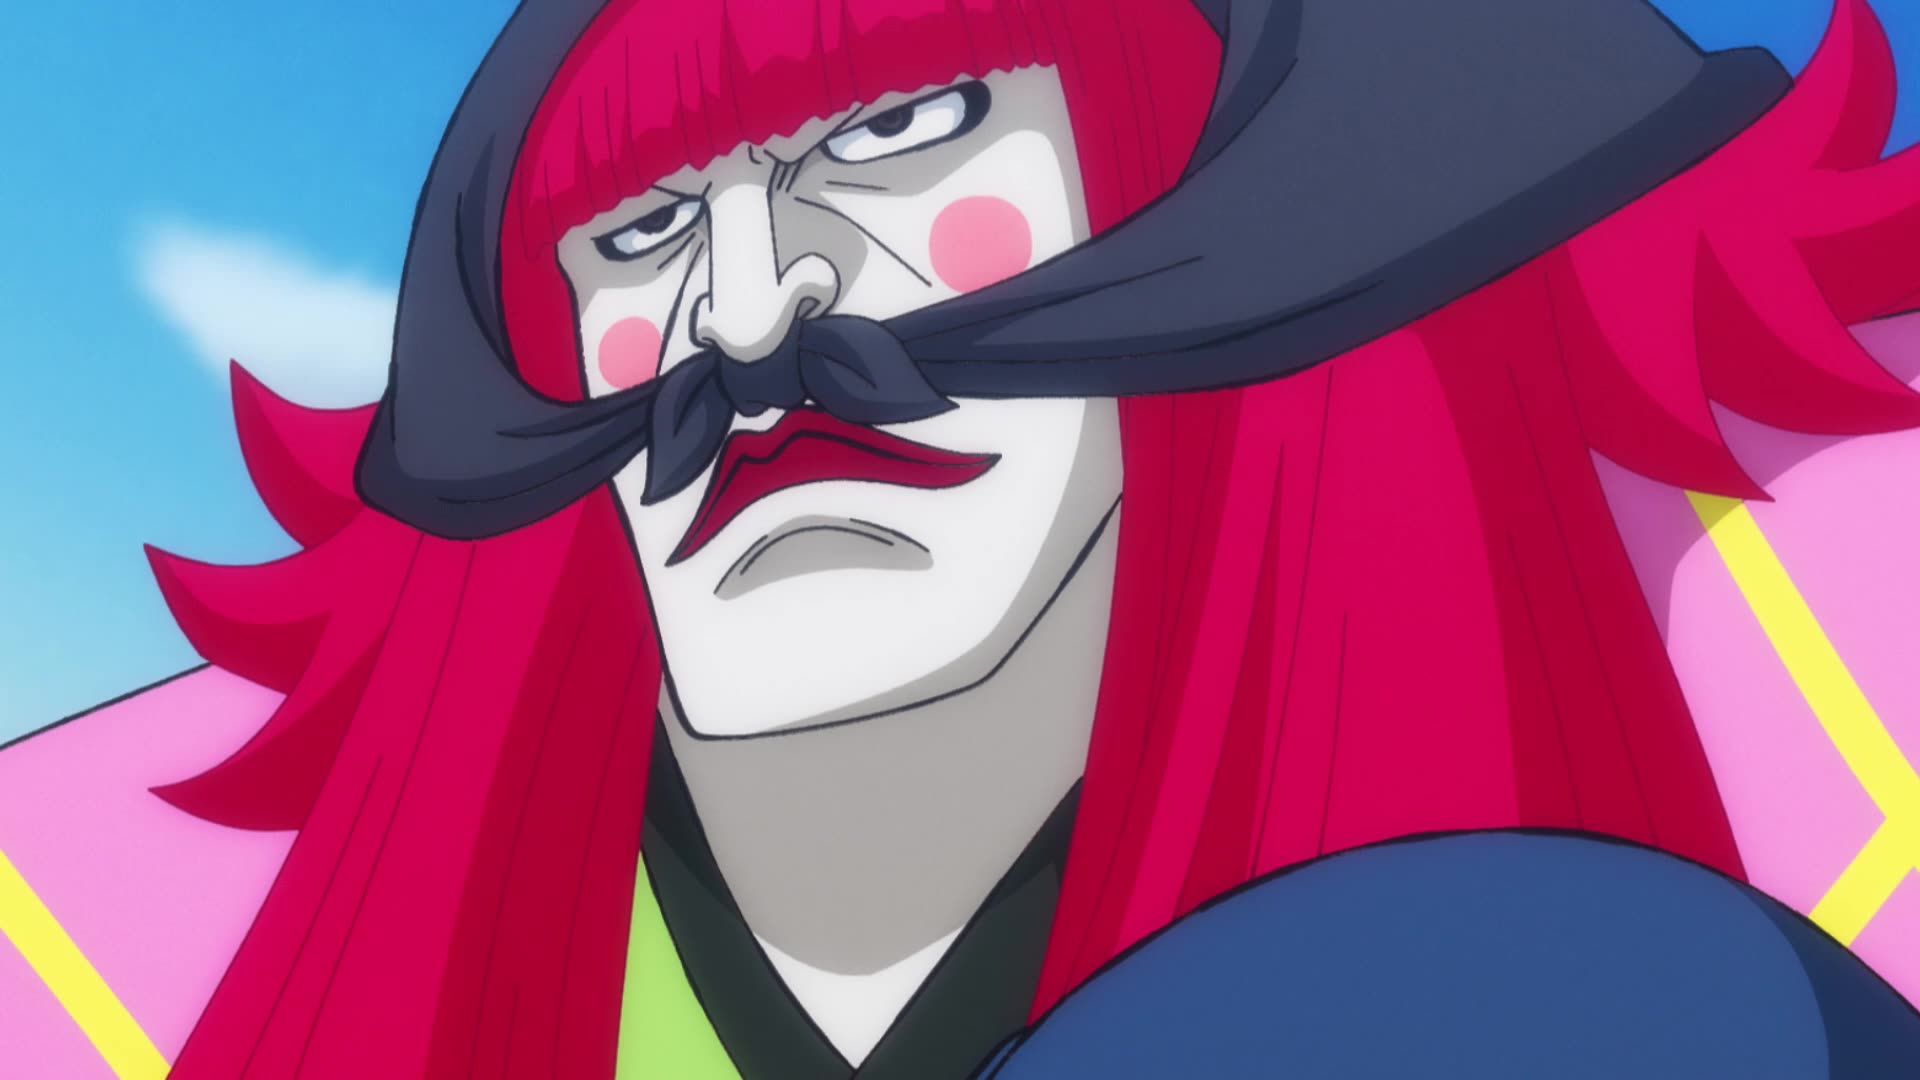 One Piece Wano Kuni 2 Current Episode 952 Tension Rises In Onigashima Two Emperors Of The Sea Meet Watch On Crunchyroll